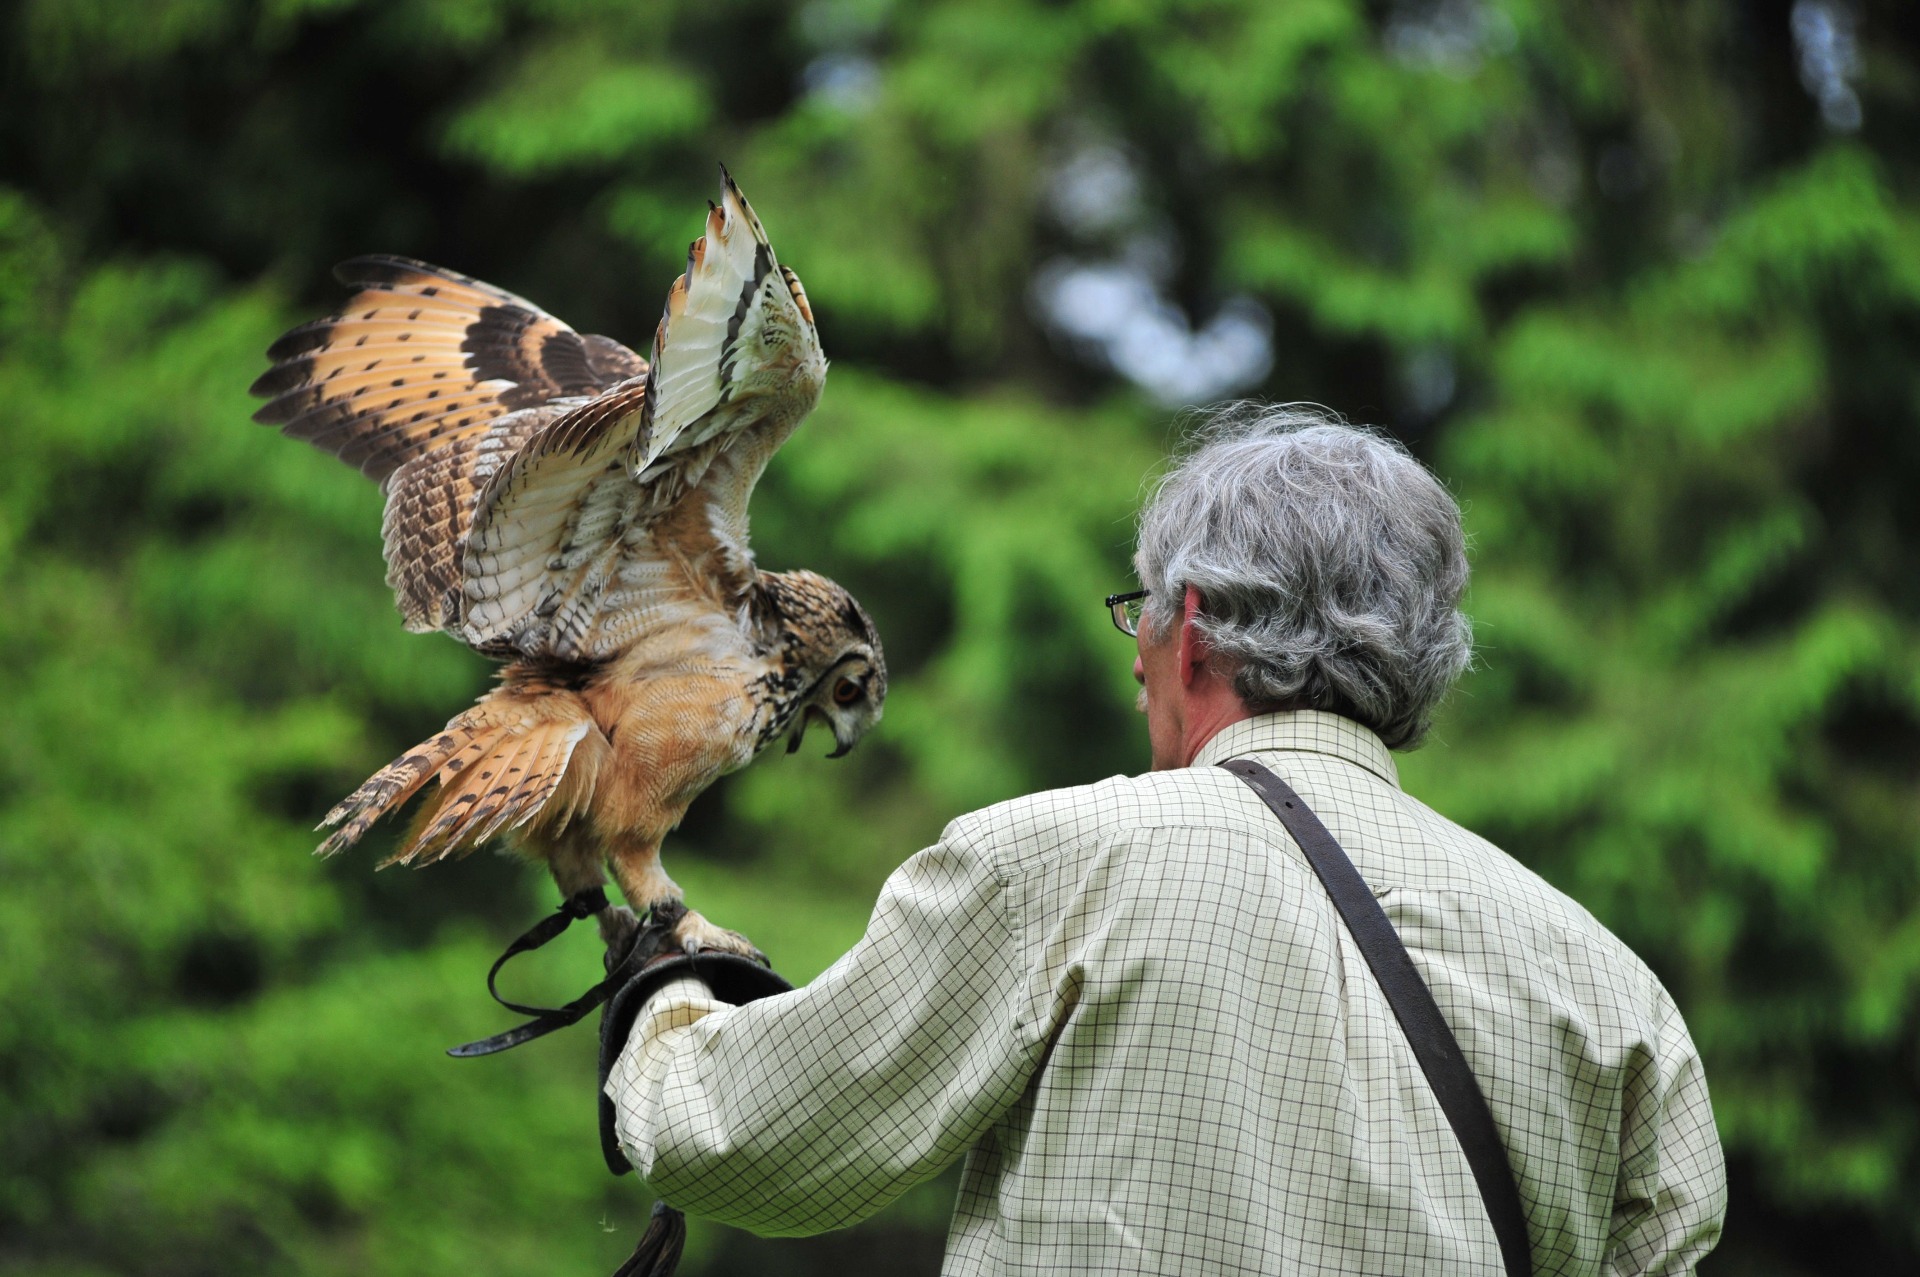 At the Domaine de Palogne, a falconer holds a magnificent owl on his arm